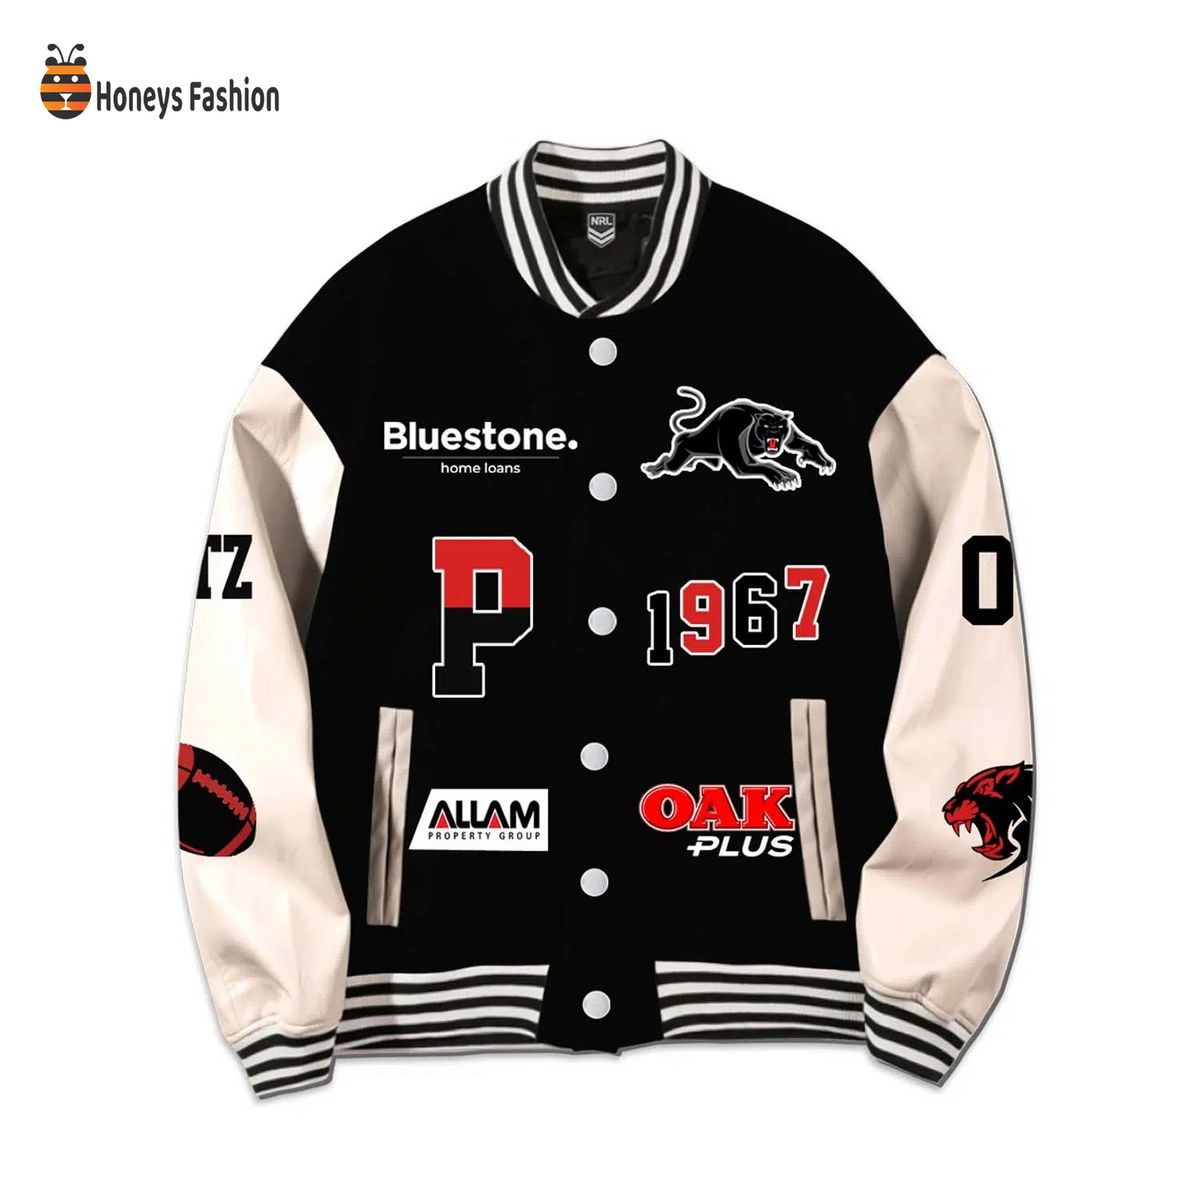 Penrith Panthers Rugby Personalized Jacket